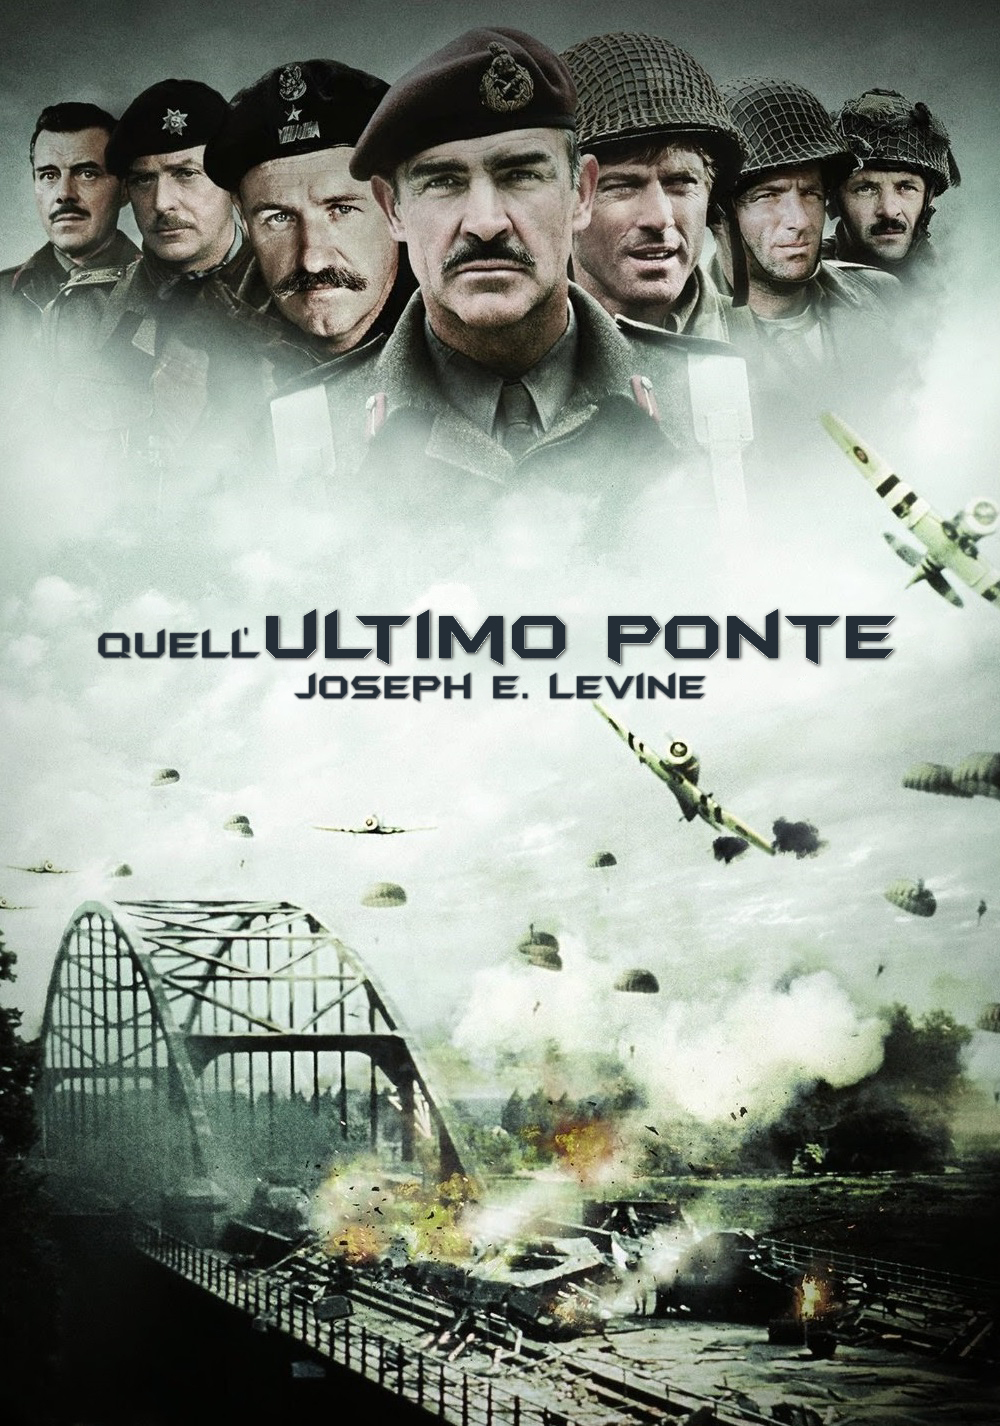 Quell’ultimo ponte [HD] (1977)